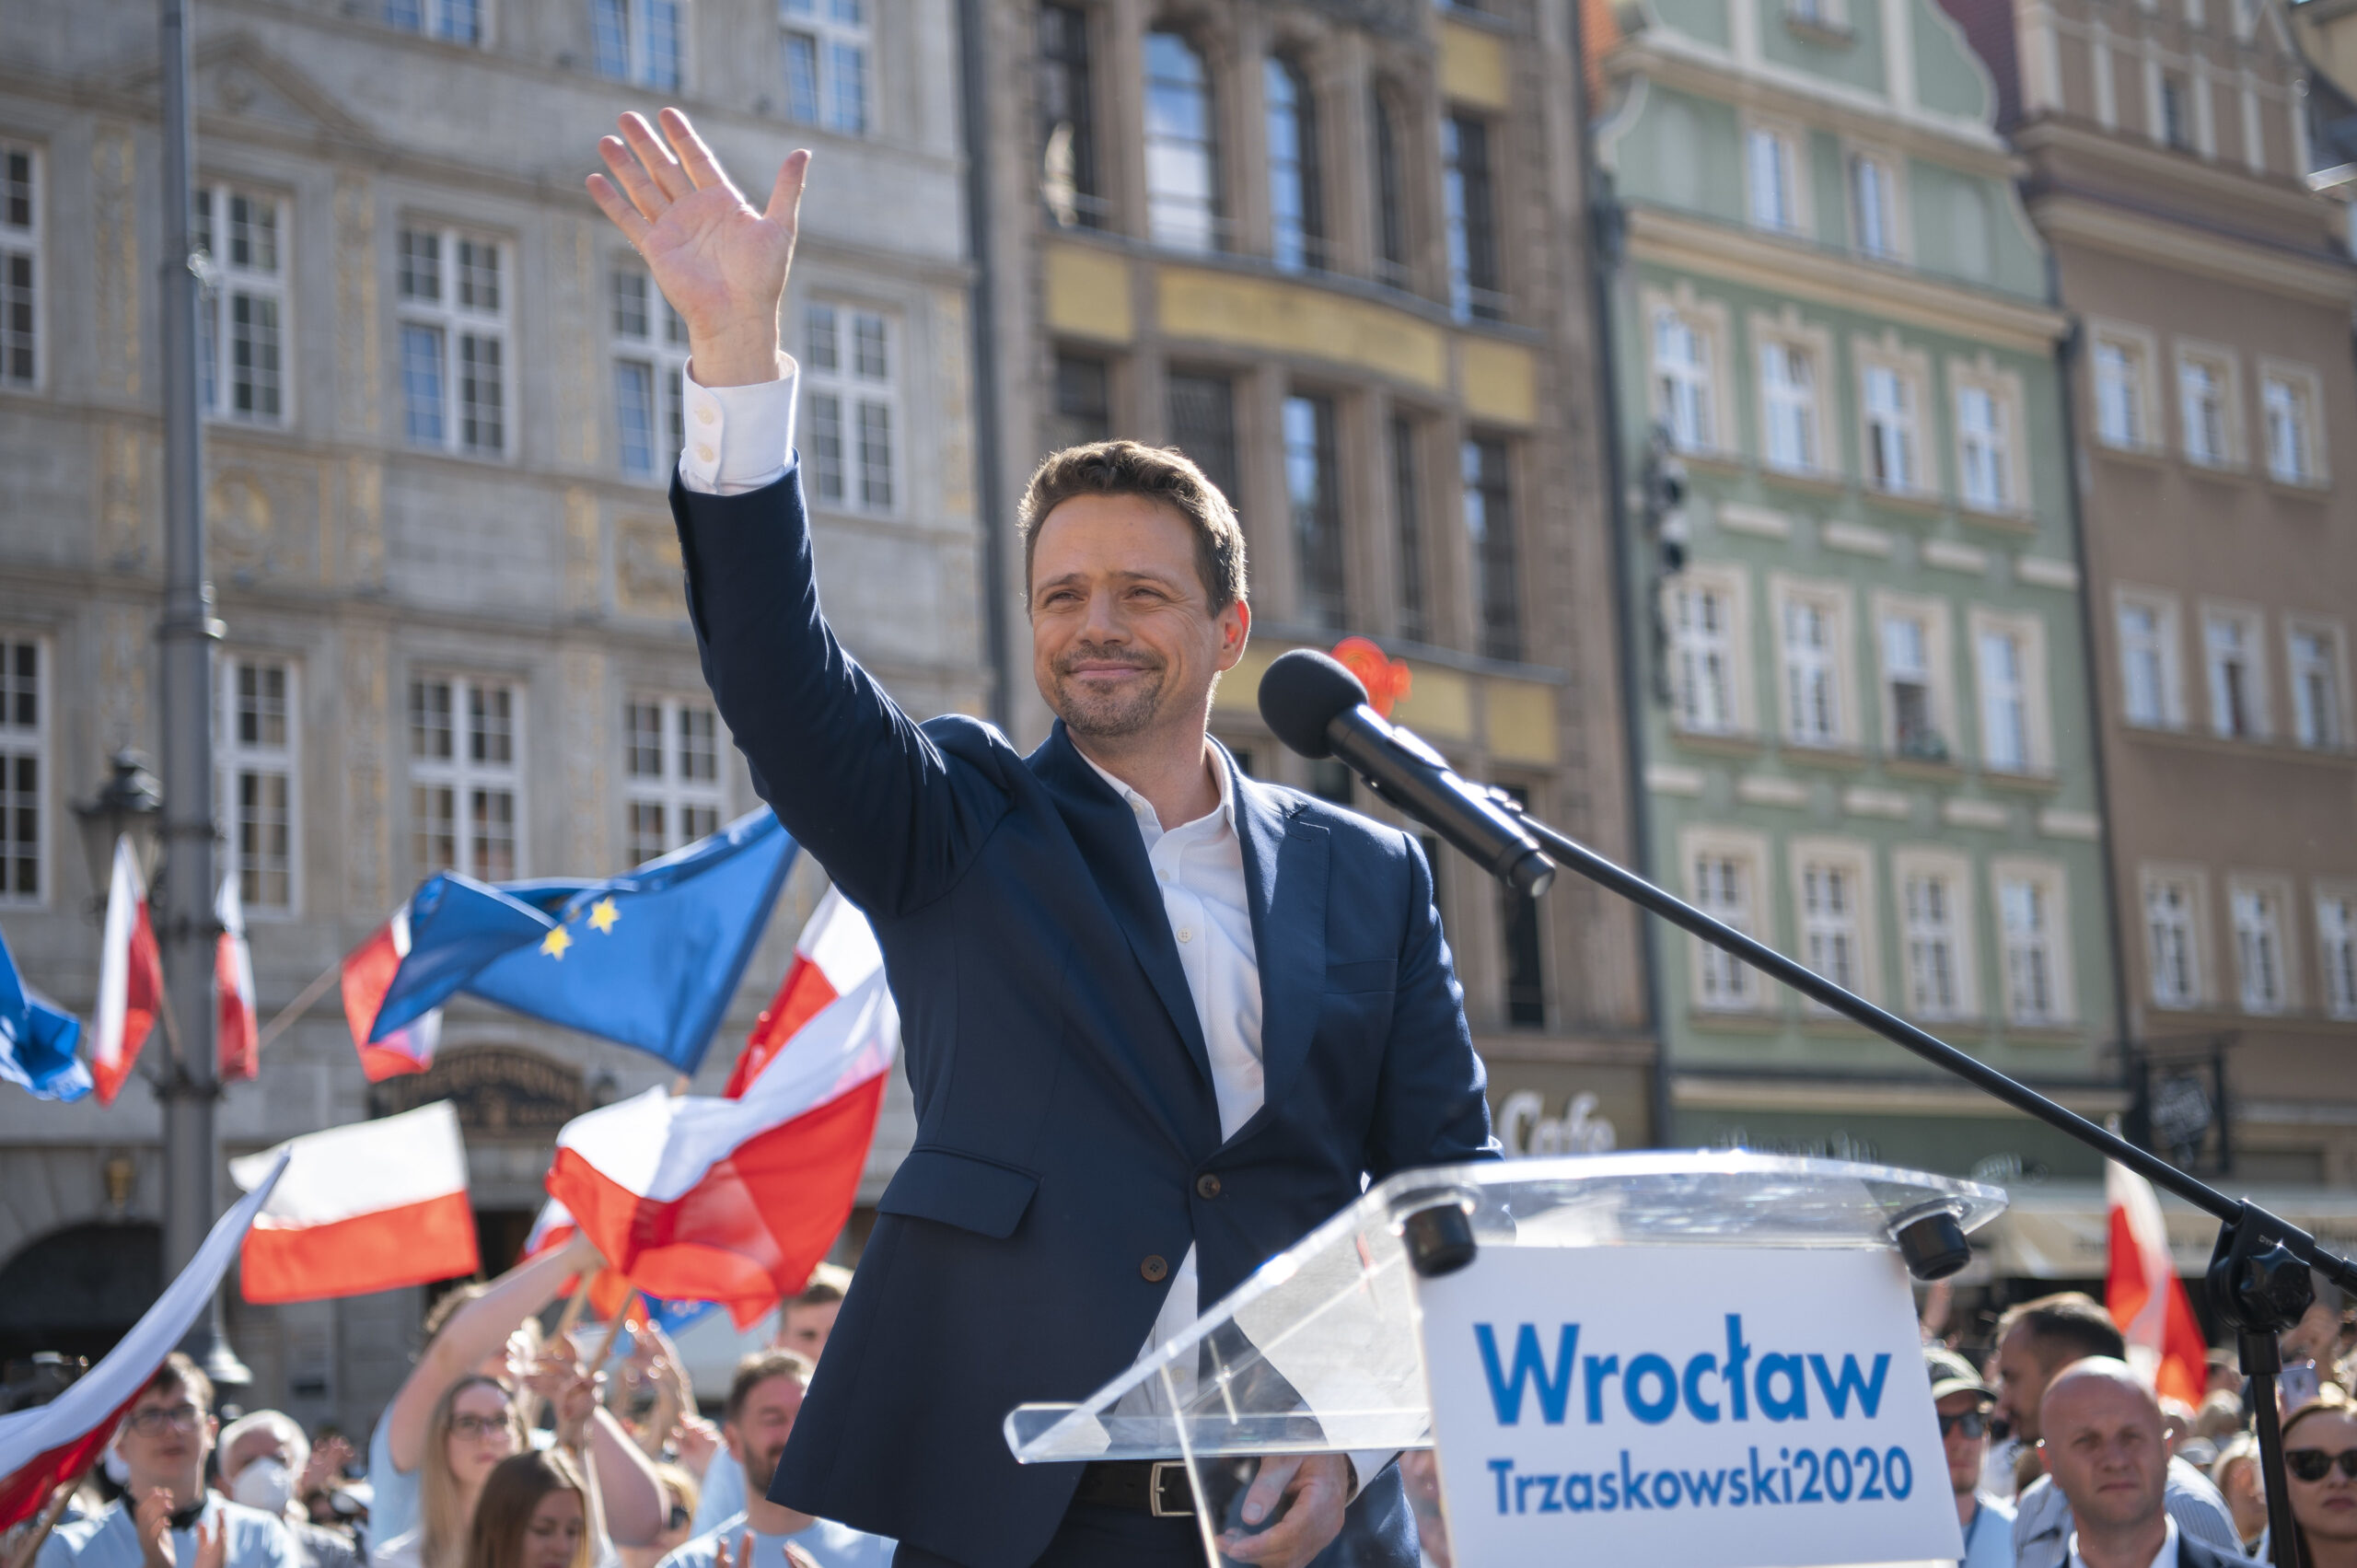 Opposition politician leads Polish trust ranking for first time in two years